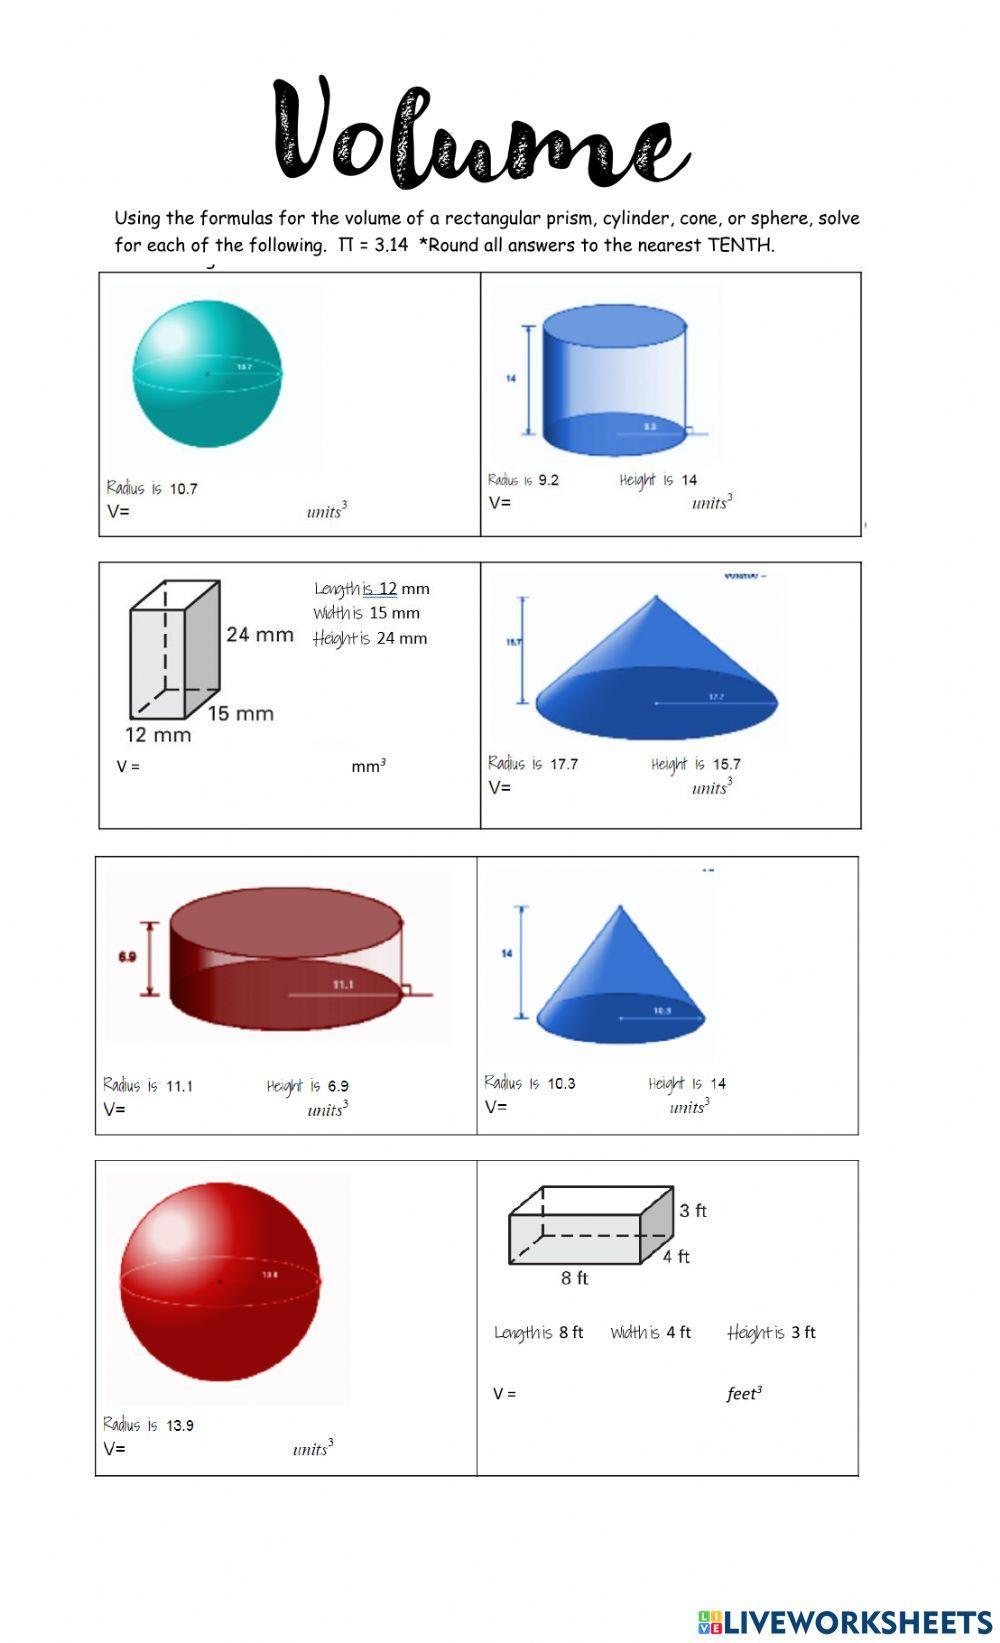 Volume - rectangular prisms, cylinders, cones, and spheres